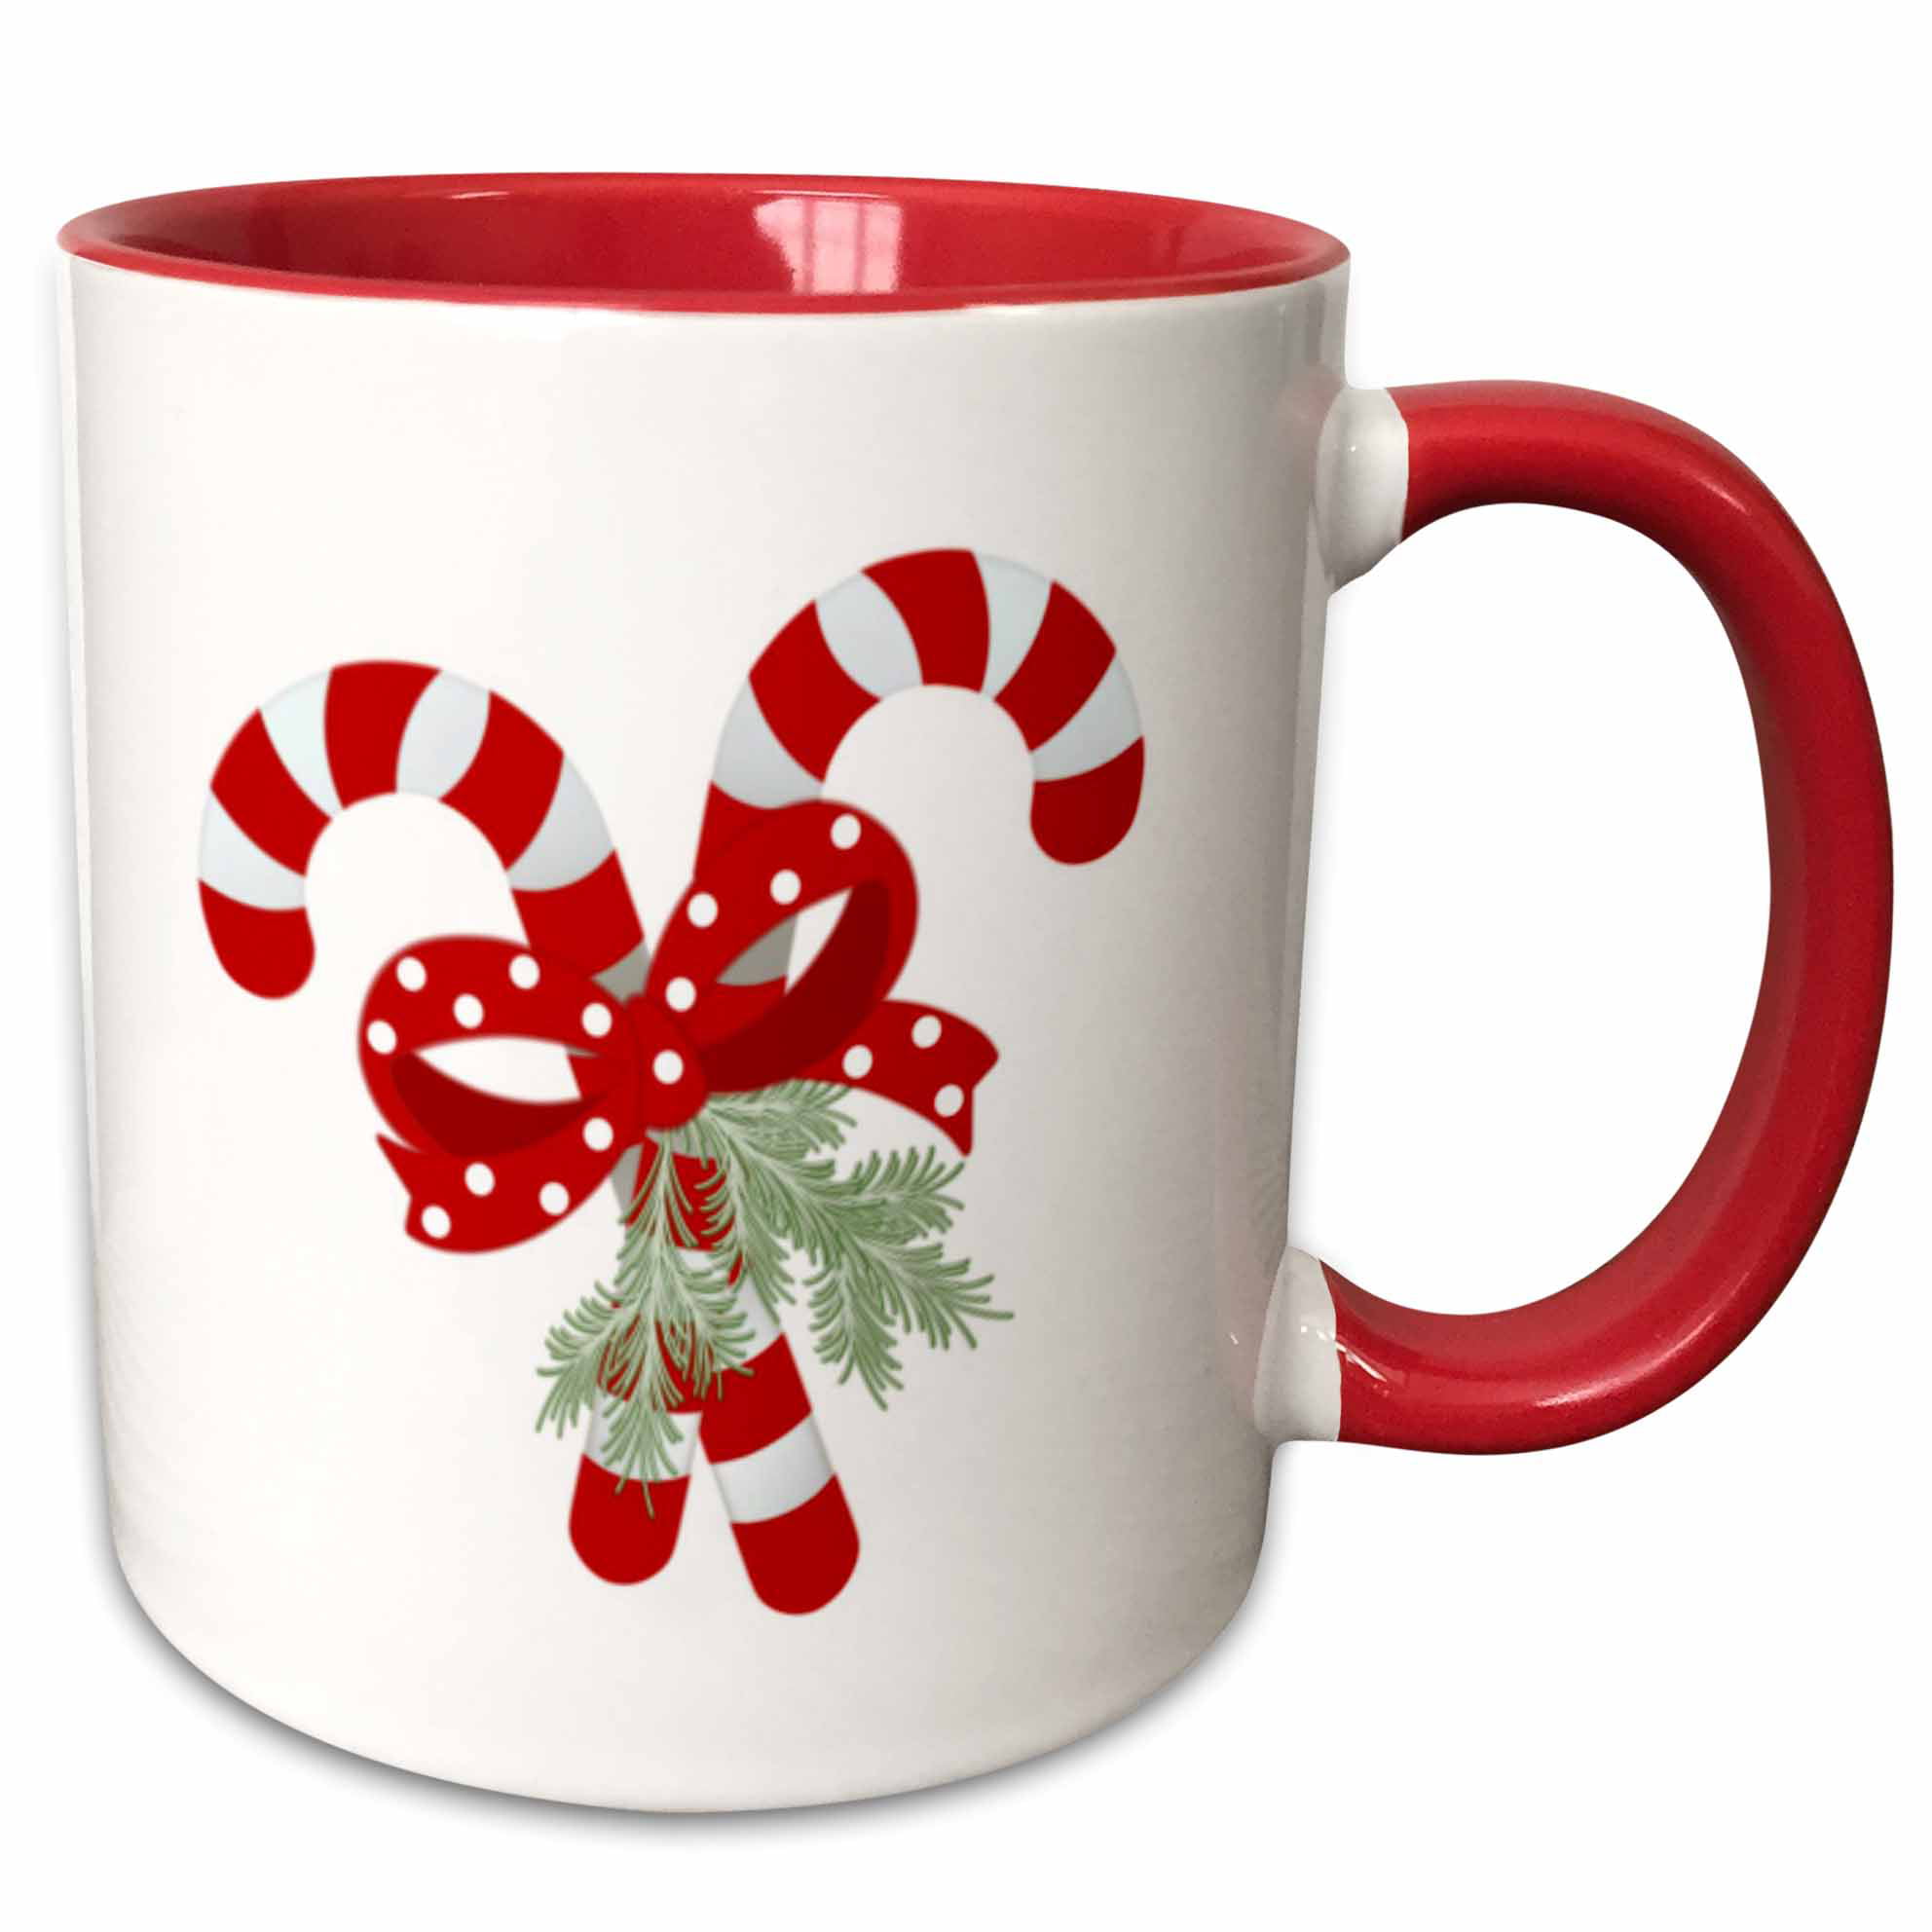 Details about   Latte Coffee Mug Cup Old World Santa Candy Canes Christmas 16 Ounce 